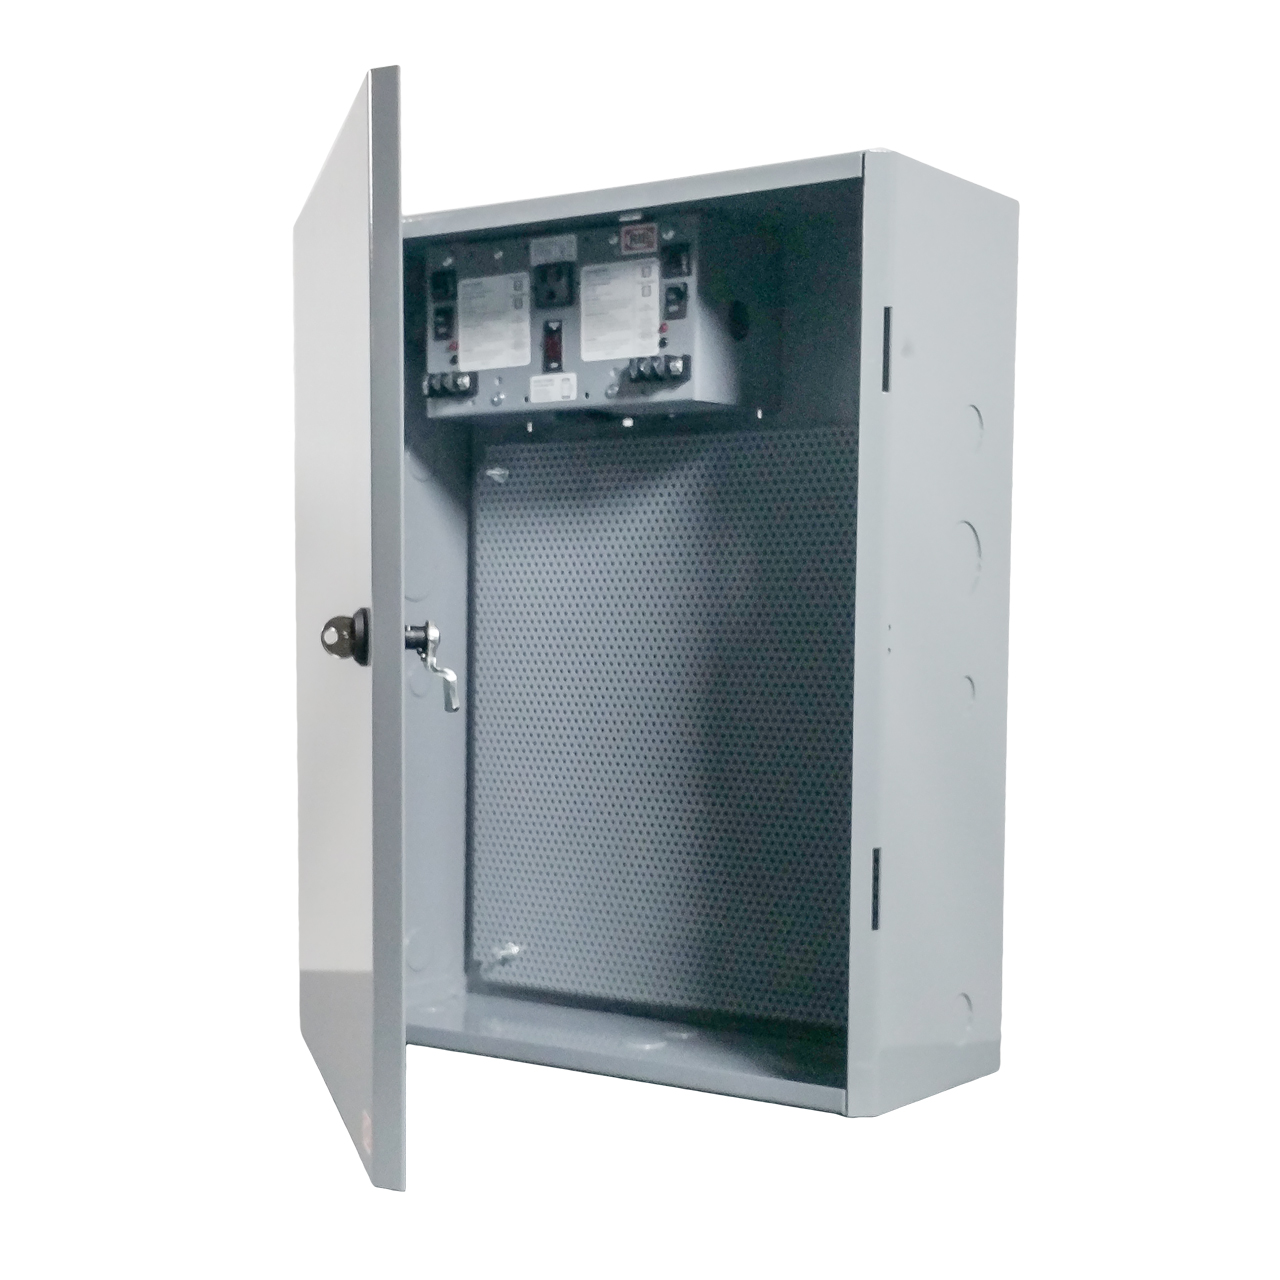 AC Power Supply, With Subpanel Mounted, Dual 100 VA, Size 20 x 16.15 x 6.72 Inch